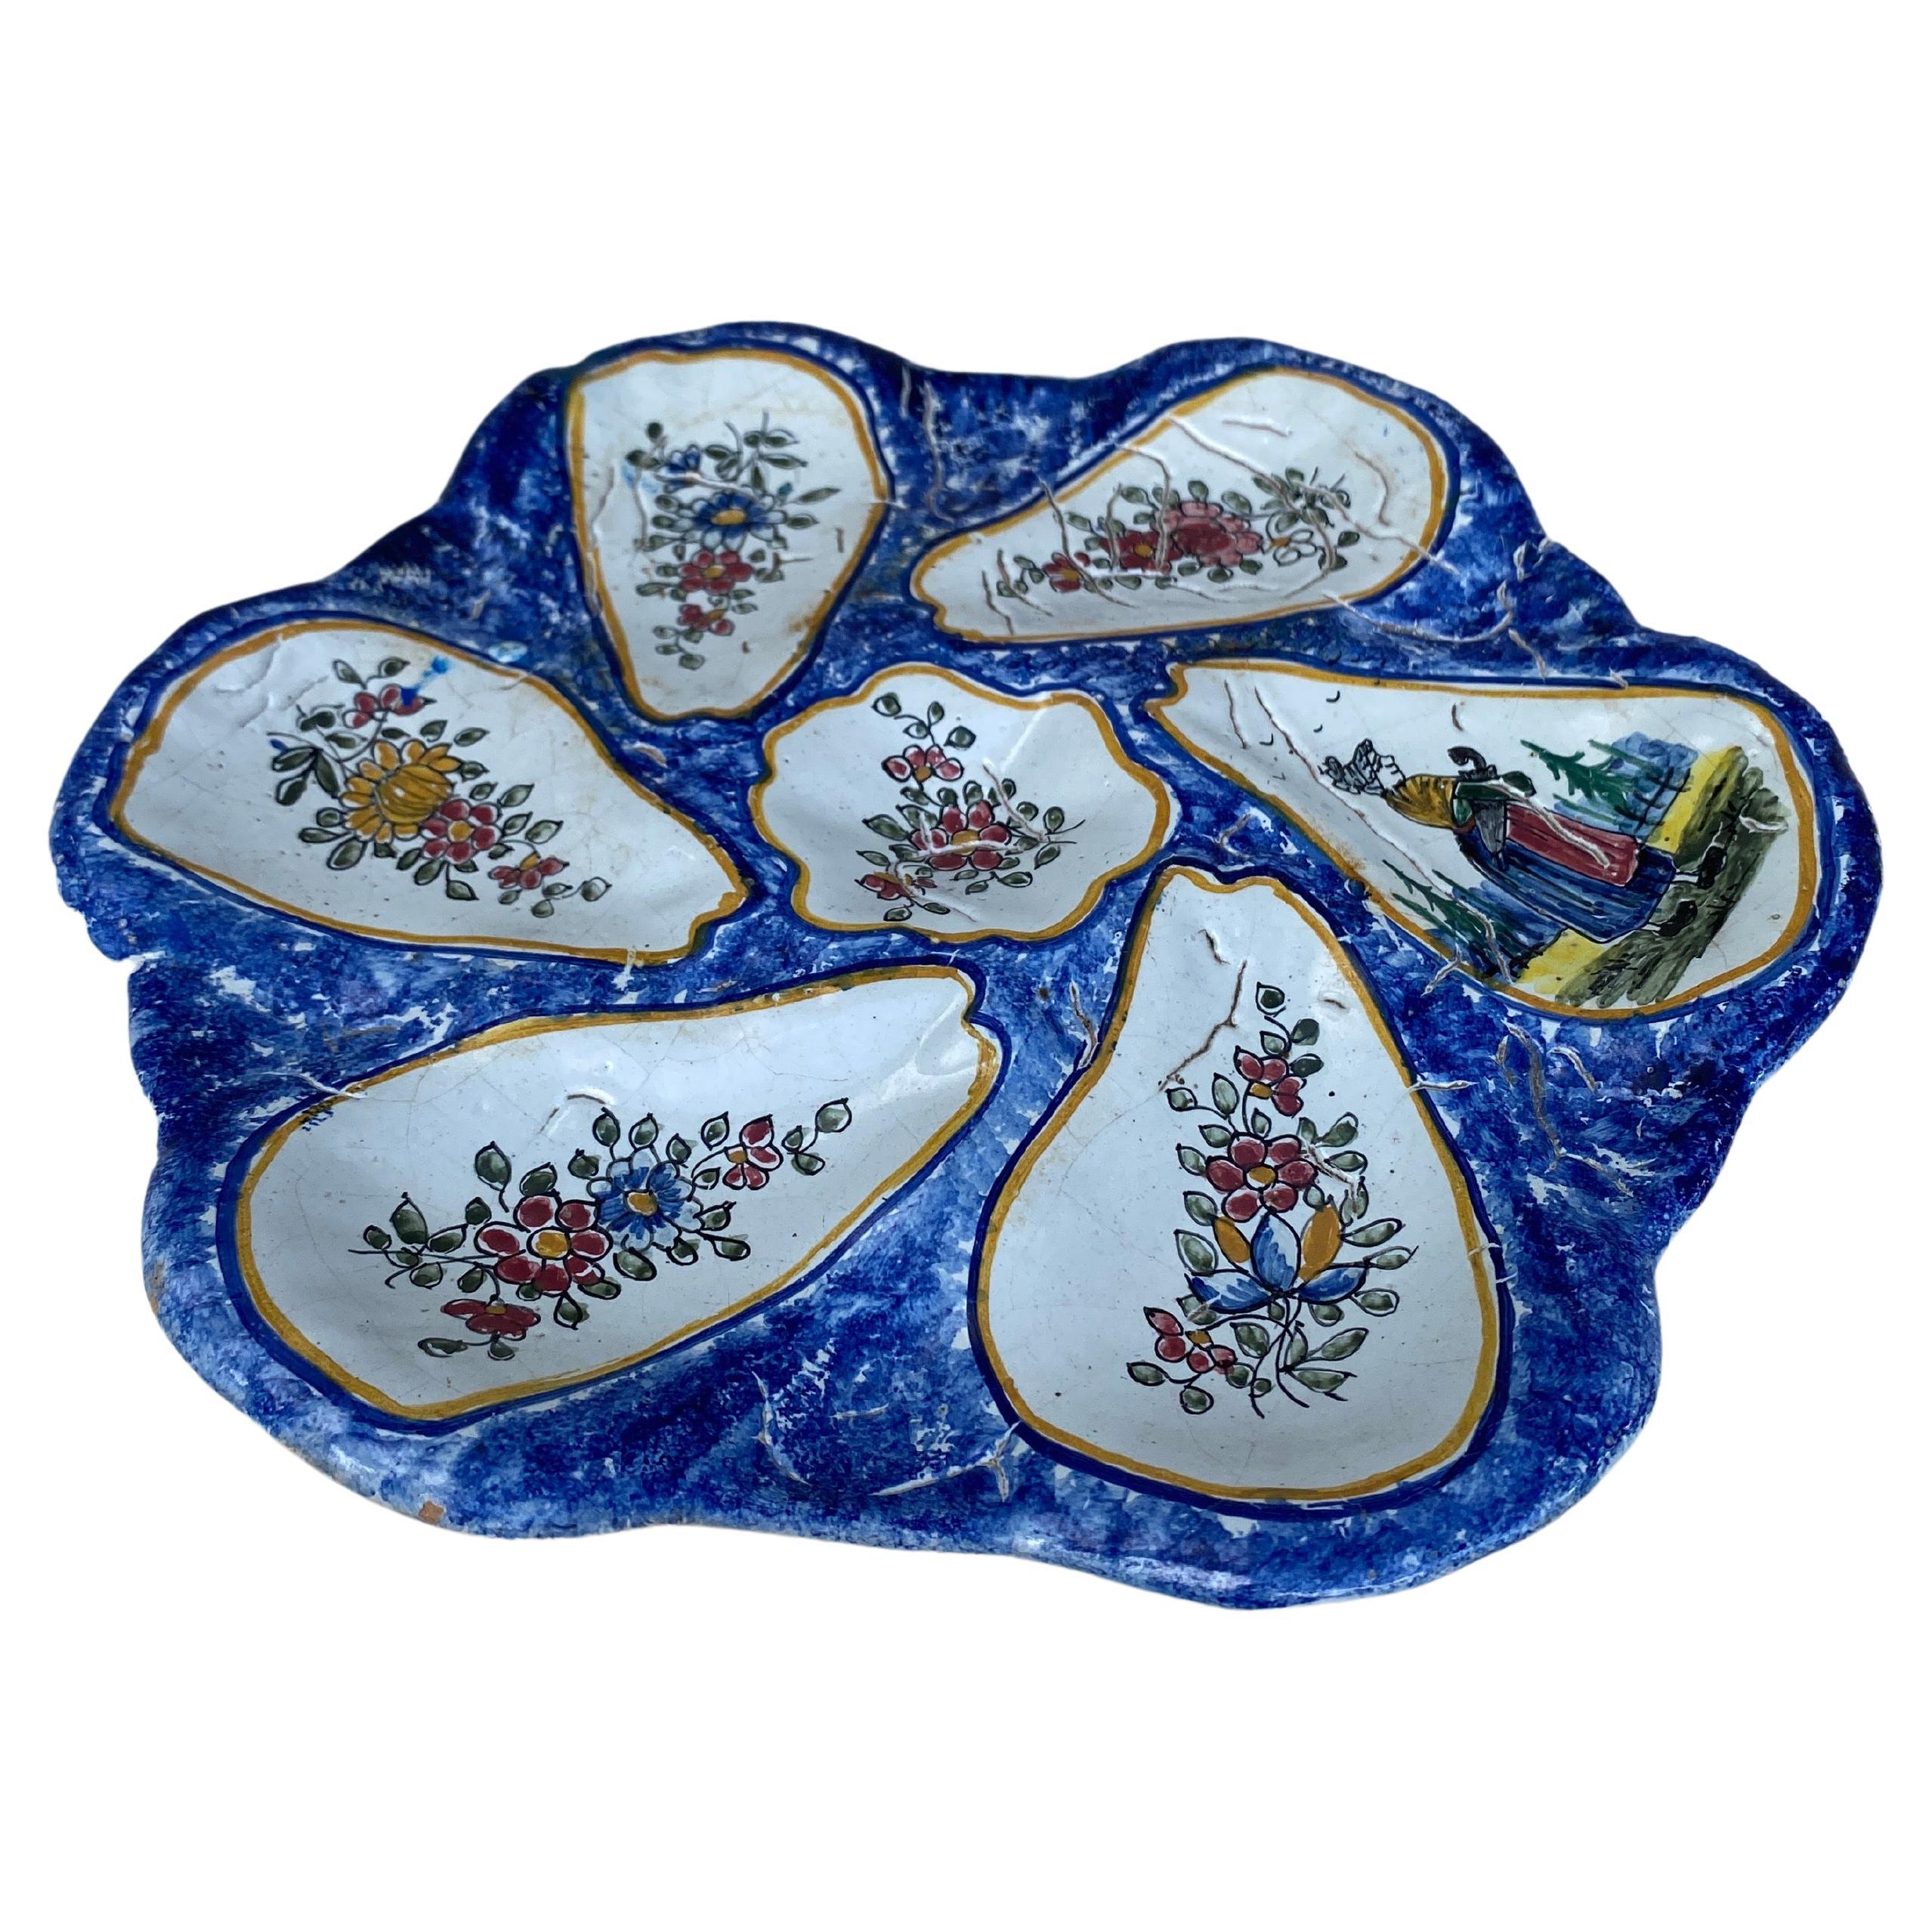 French rustic faience oyster plate with flowers and bretonne circa 1920.